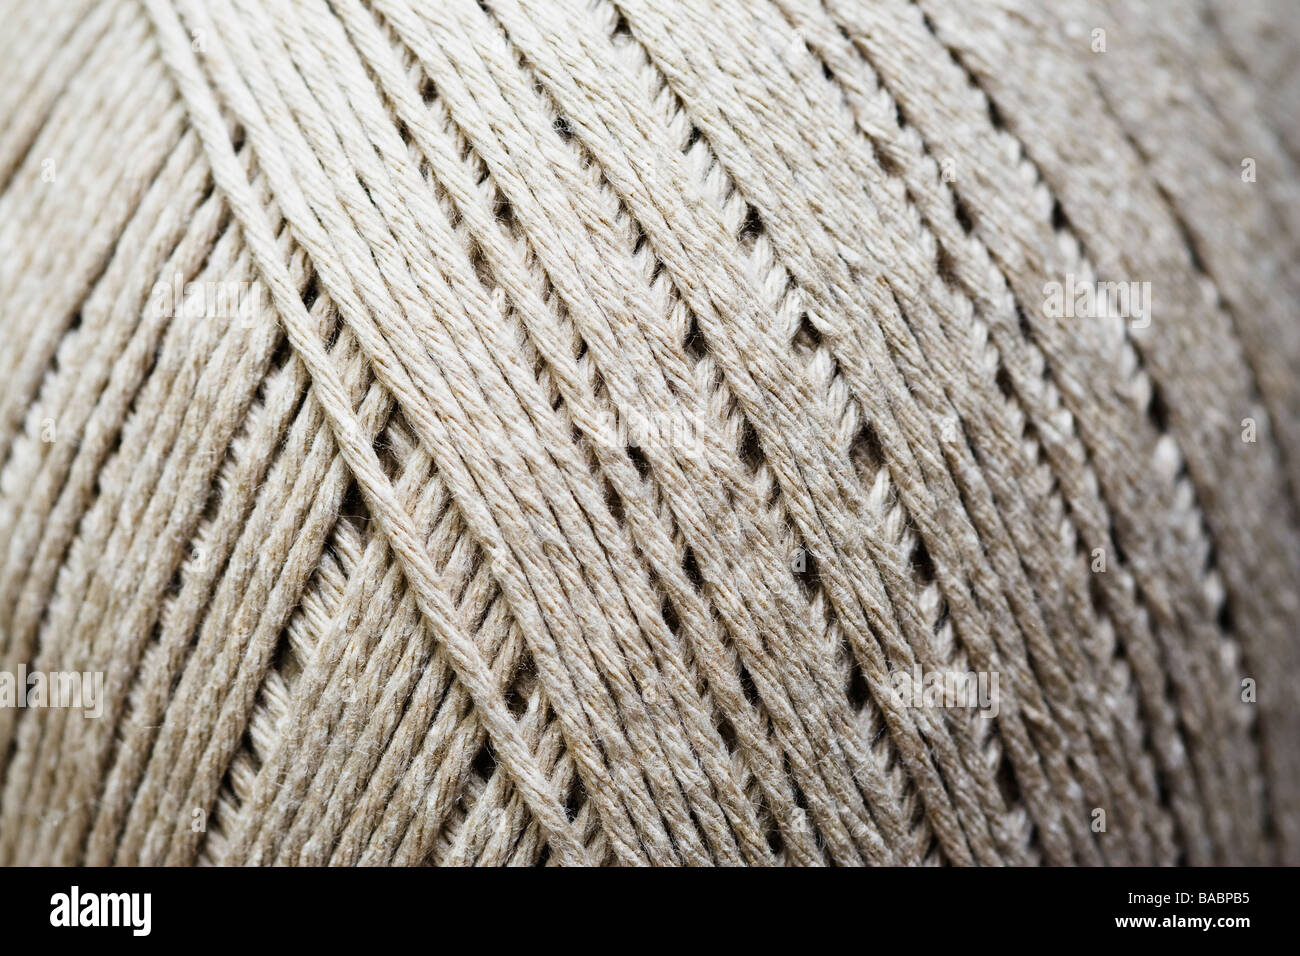 Close up of a ball of natural colored cotton yarn/twine. Stock Photo